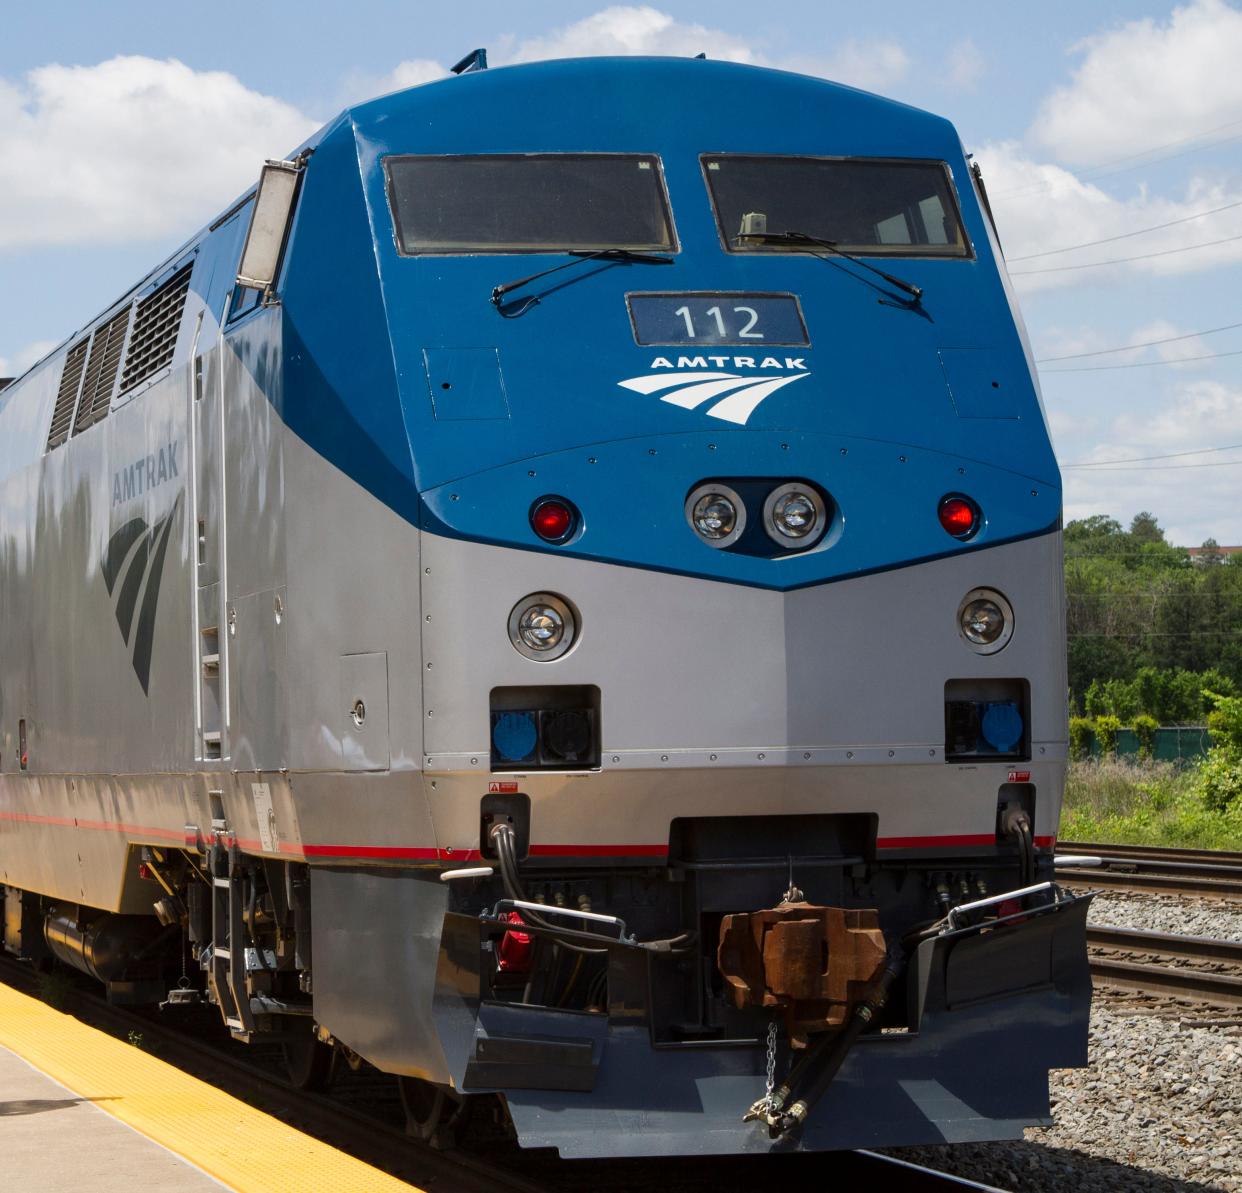 An Amtrak train is shown in this 2013 photo.